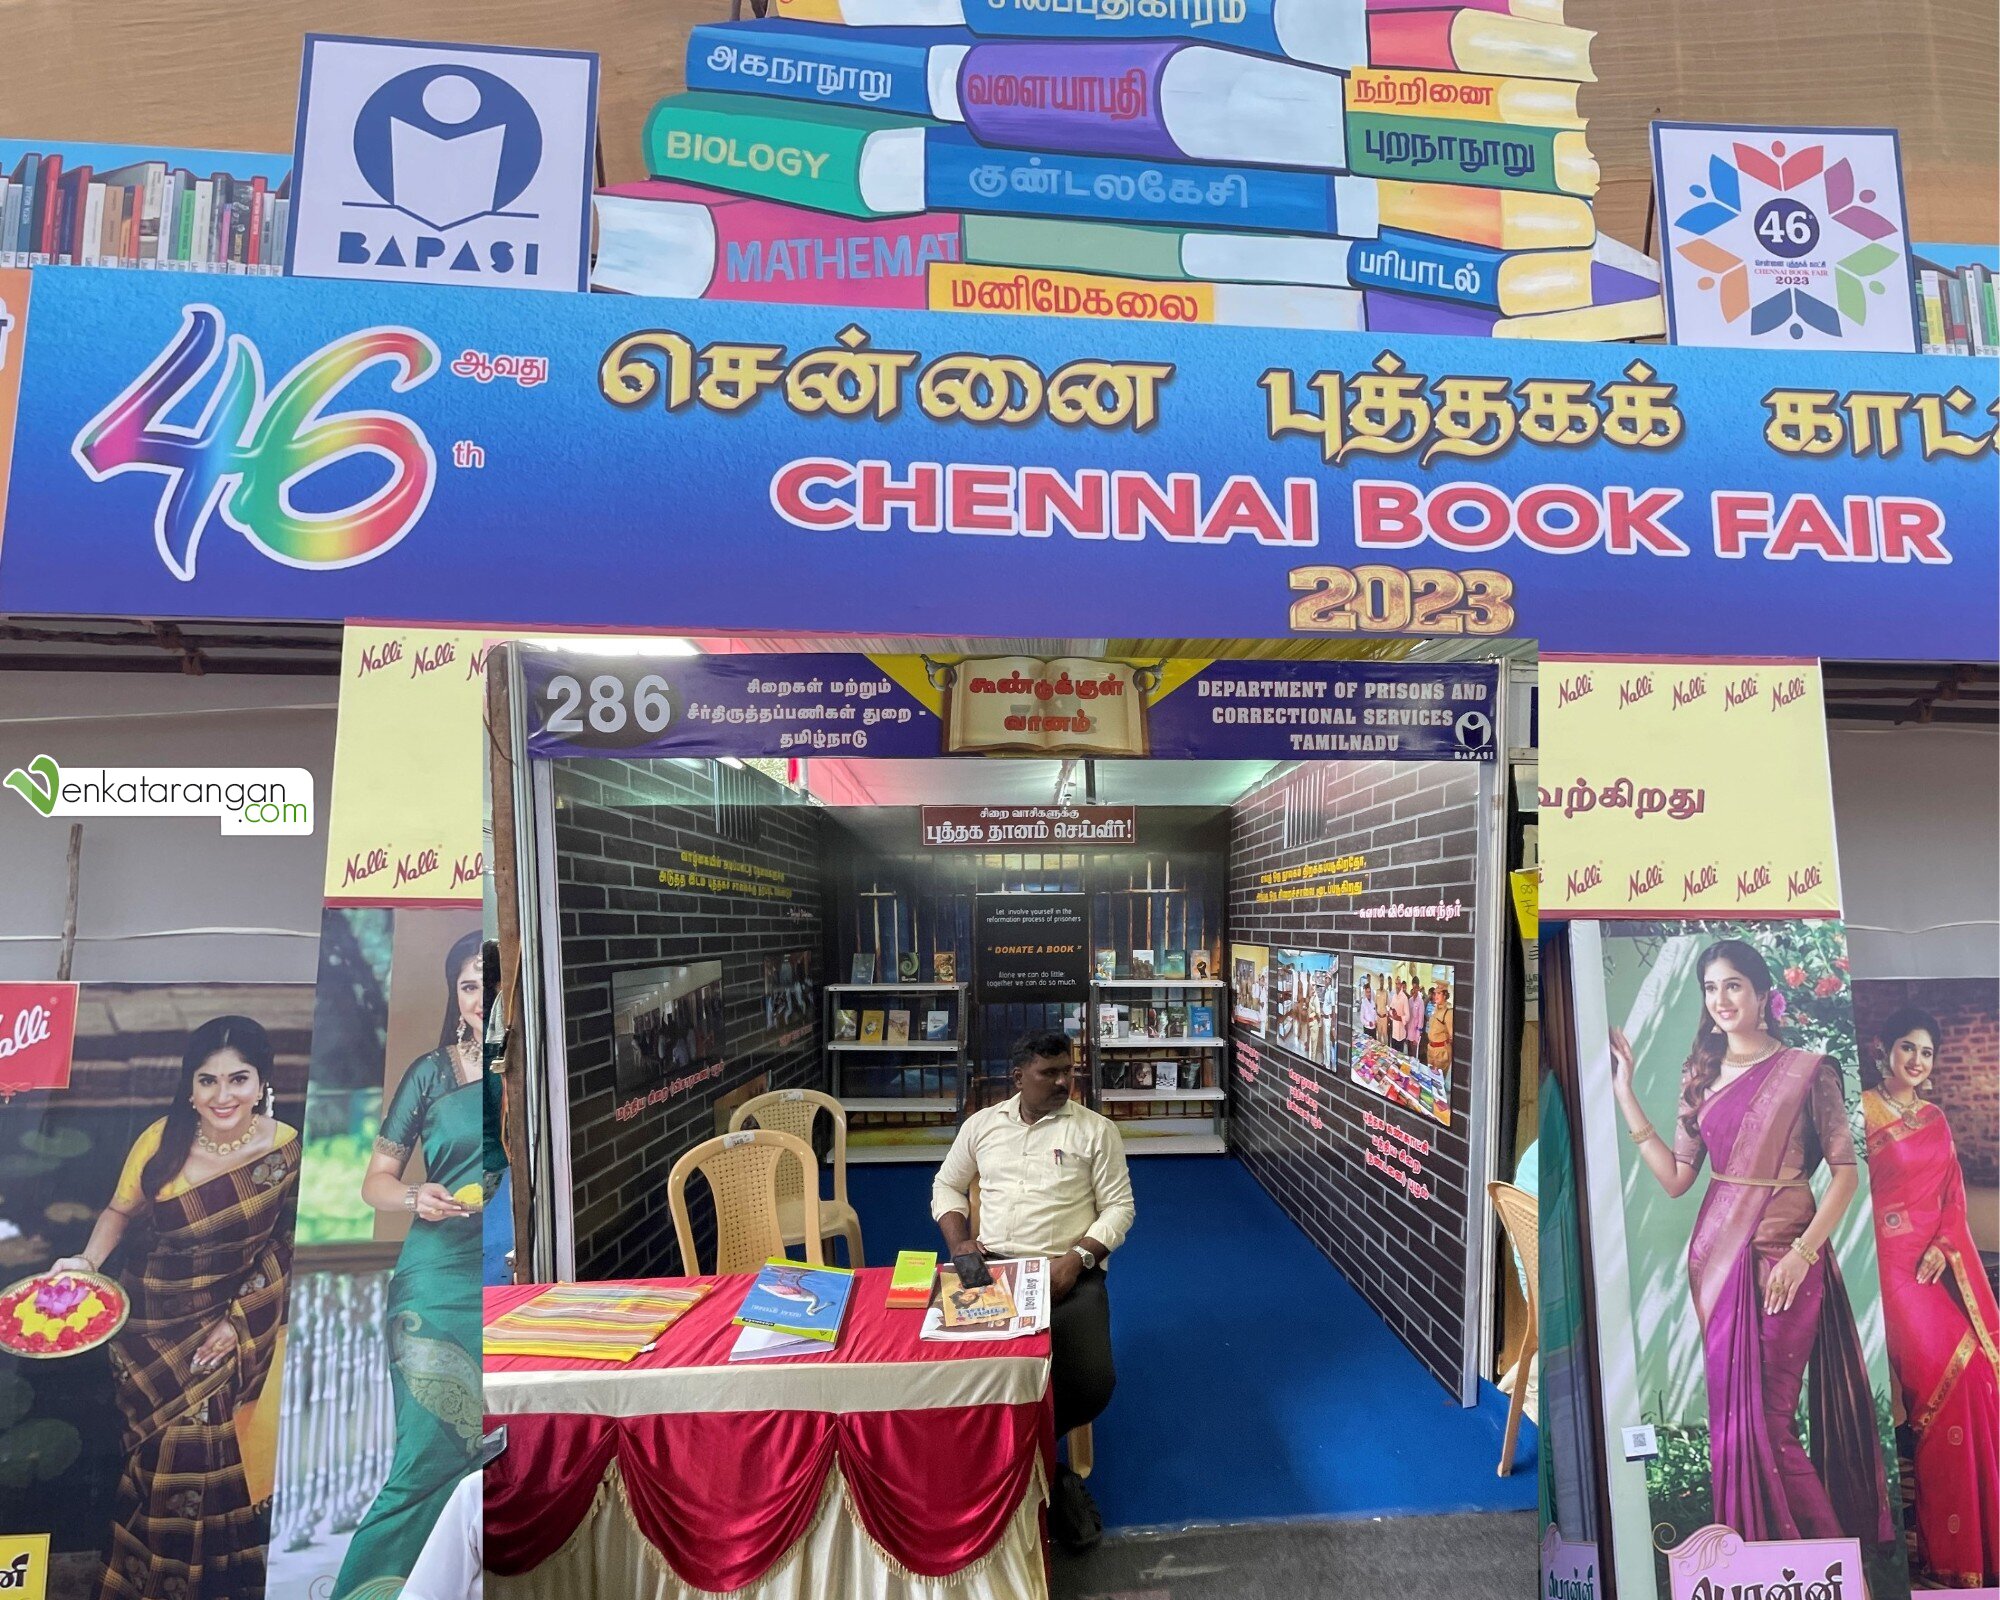 Donate a book to prisoners, Tamil Nadu Prison department's stall 